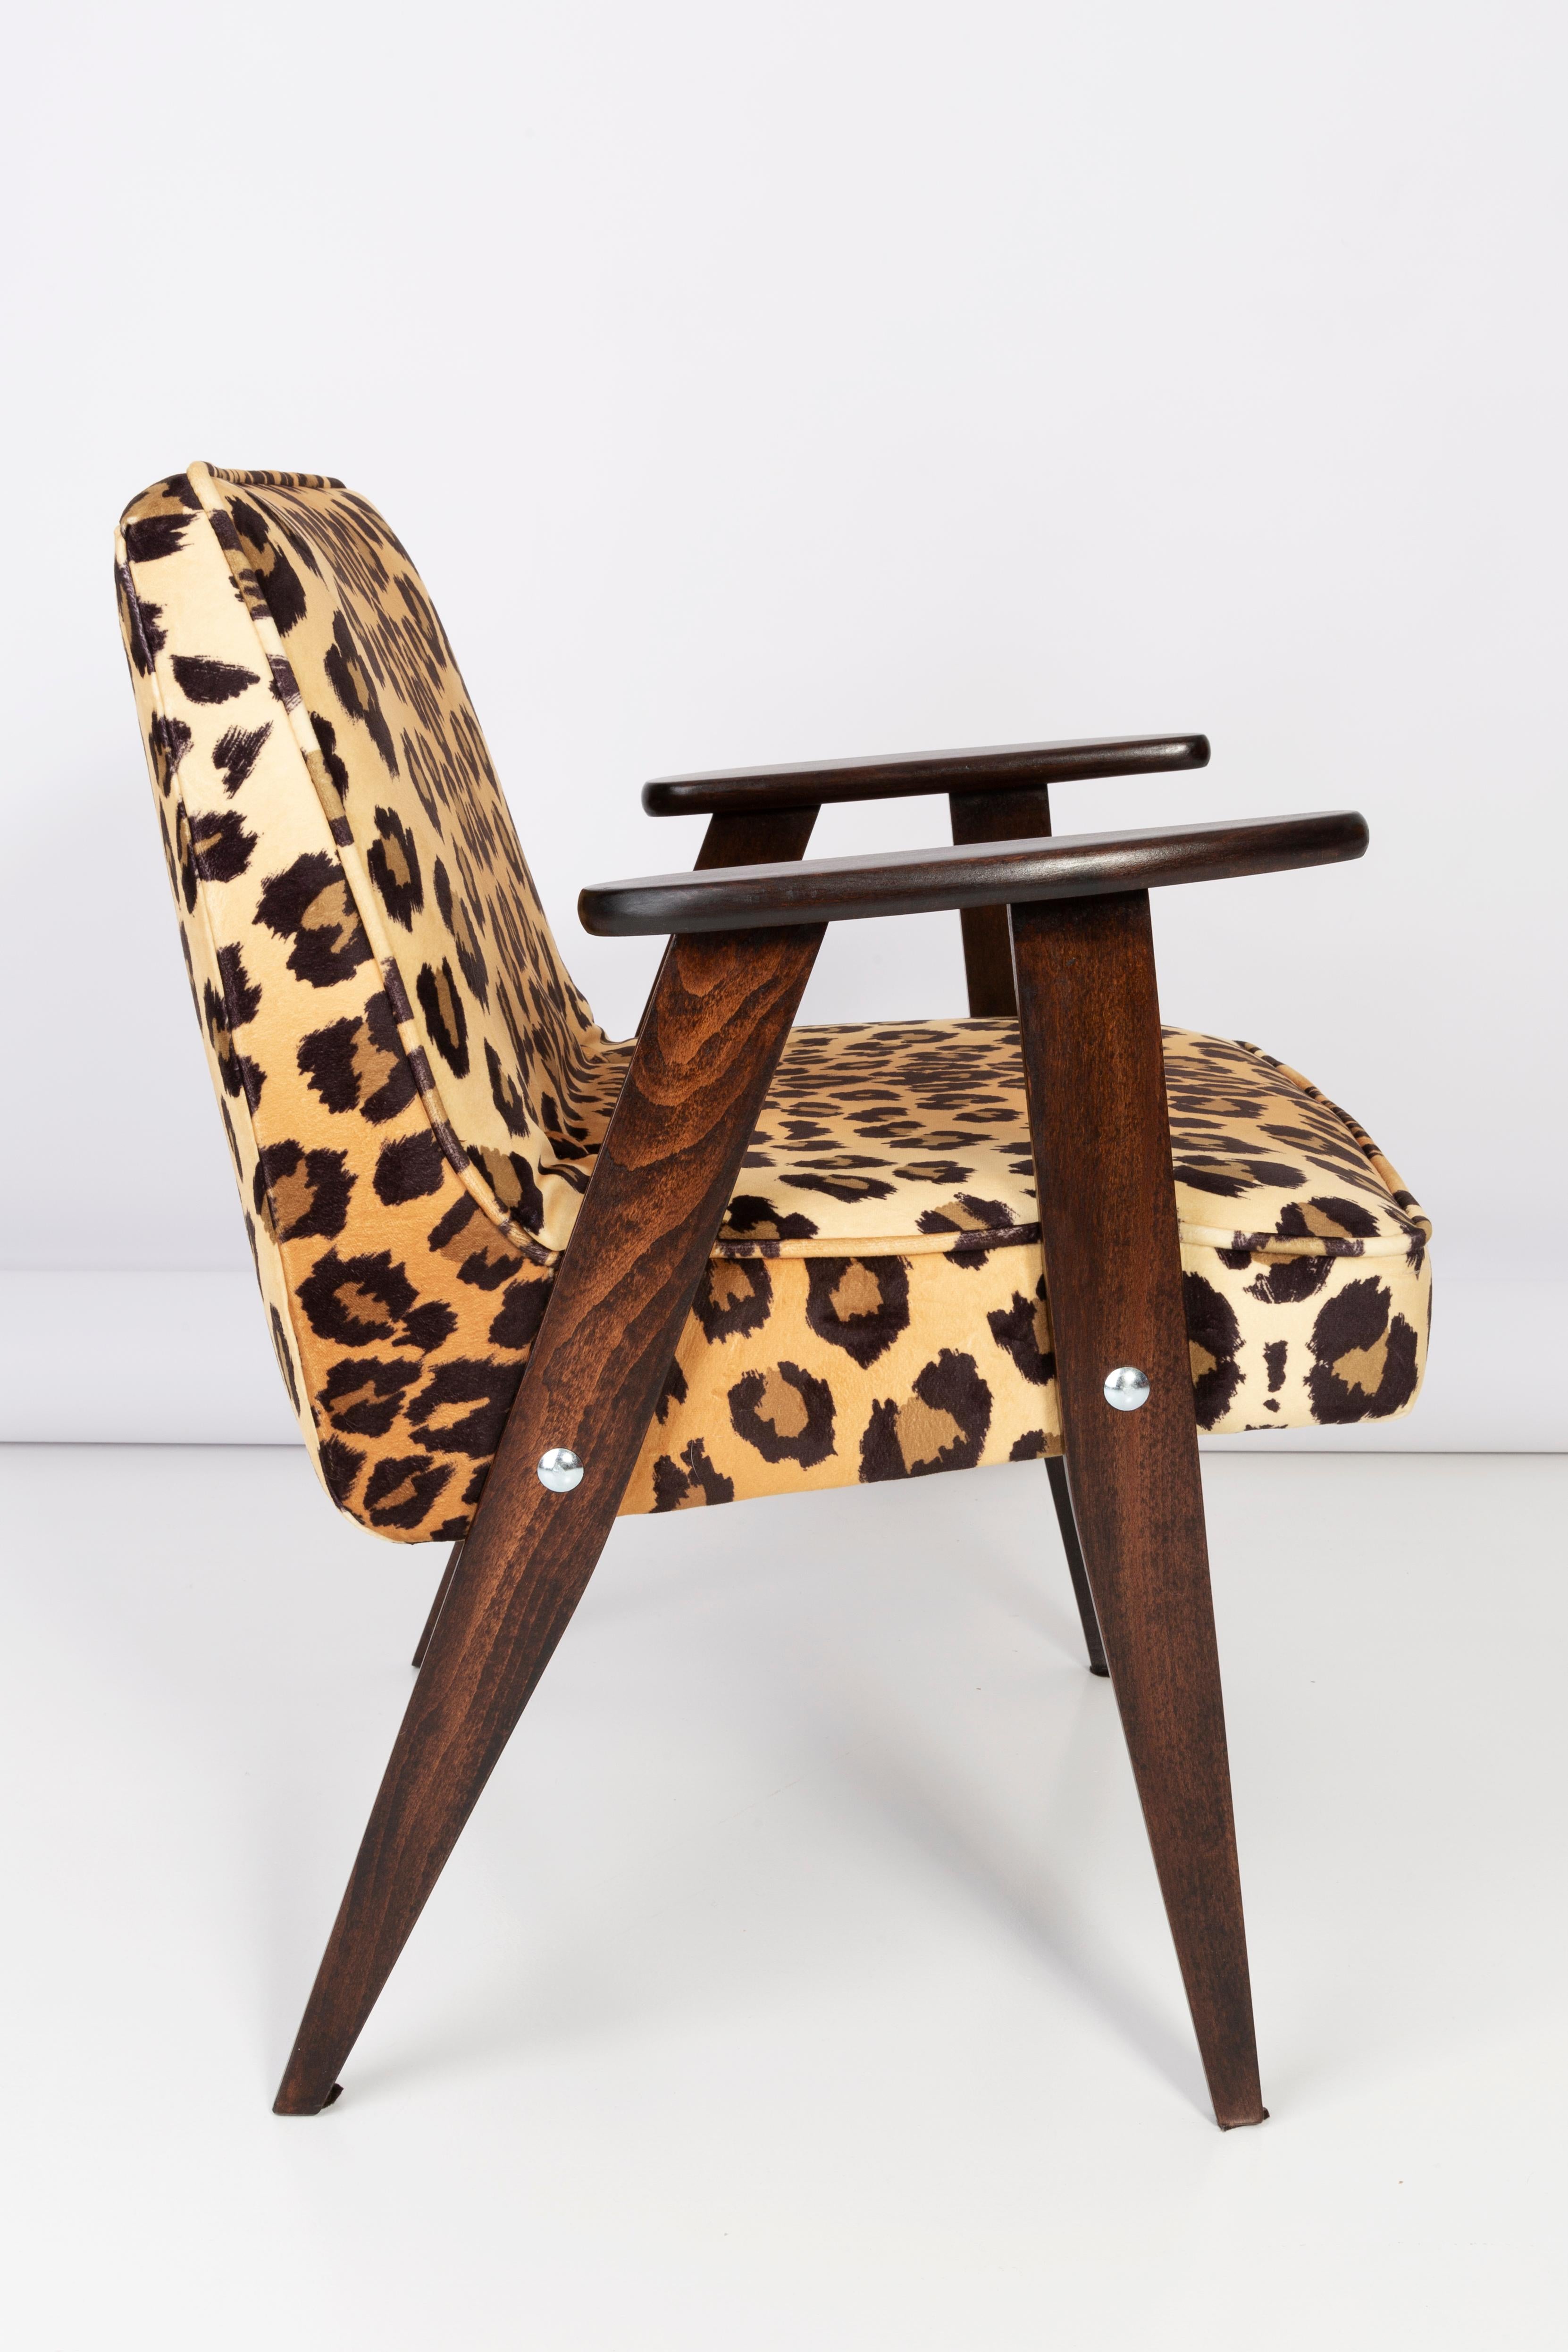 Polish Eight Midcentury 366 Armchairs in Leopard Print Velvet, Jozef Chierowski, 1960s For Sale